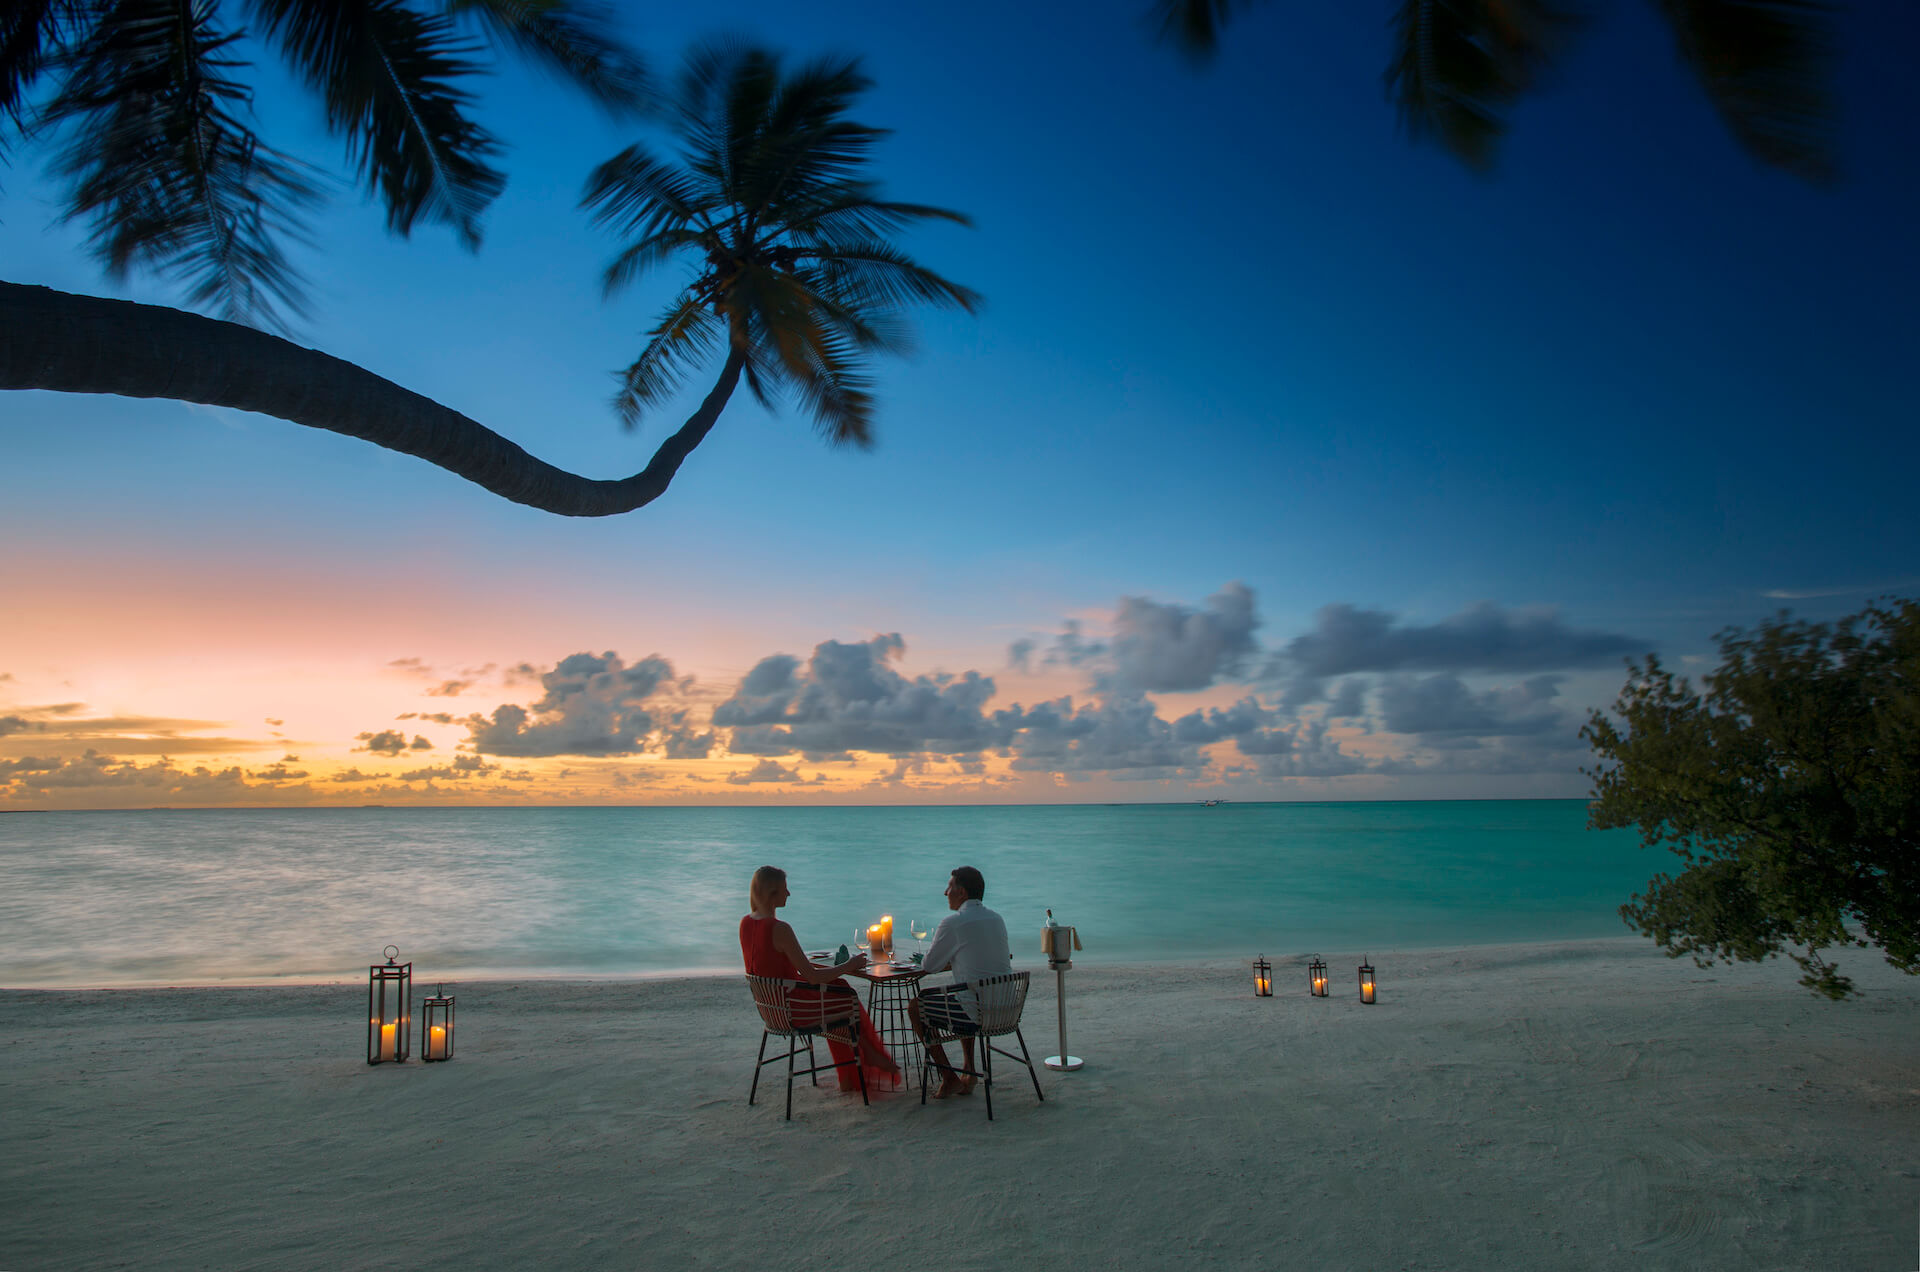 Maldives for two: which island to choose